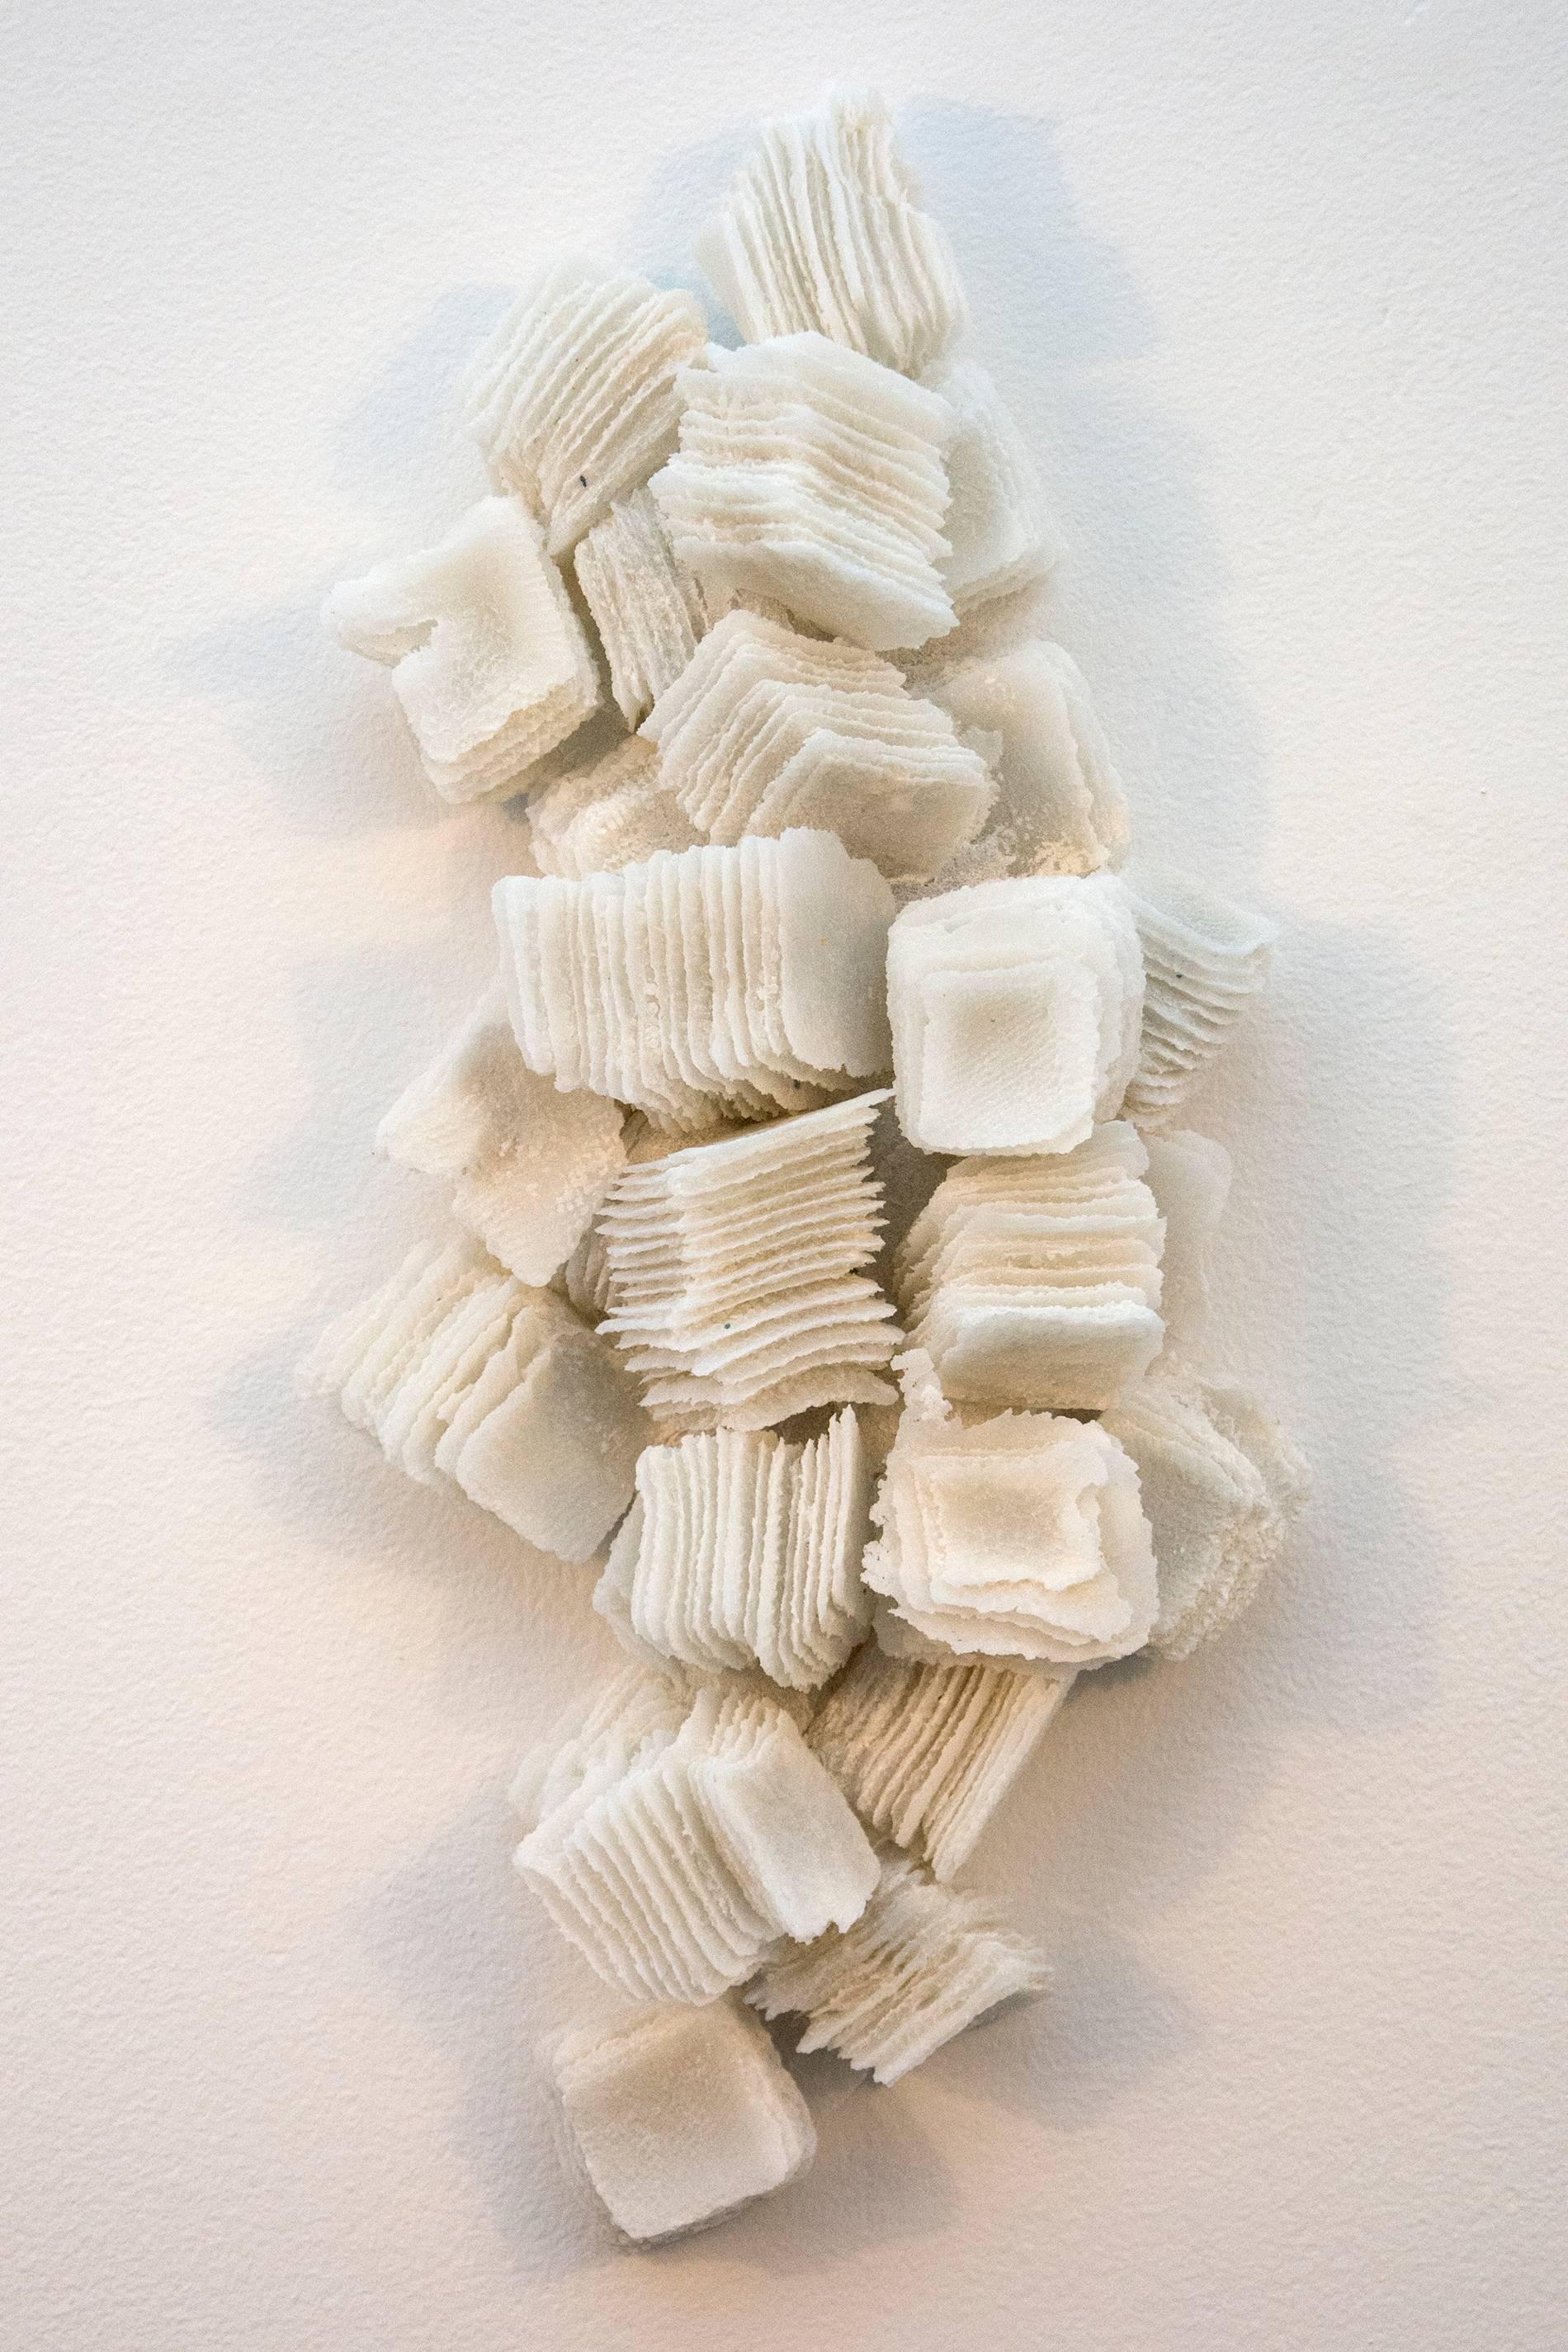 Cheryl Wilson Smith Abstract Sculpture - Ice Ridge No 3 - dynamic, textured, white, glass sculpted wall relief